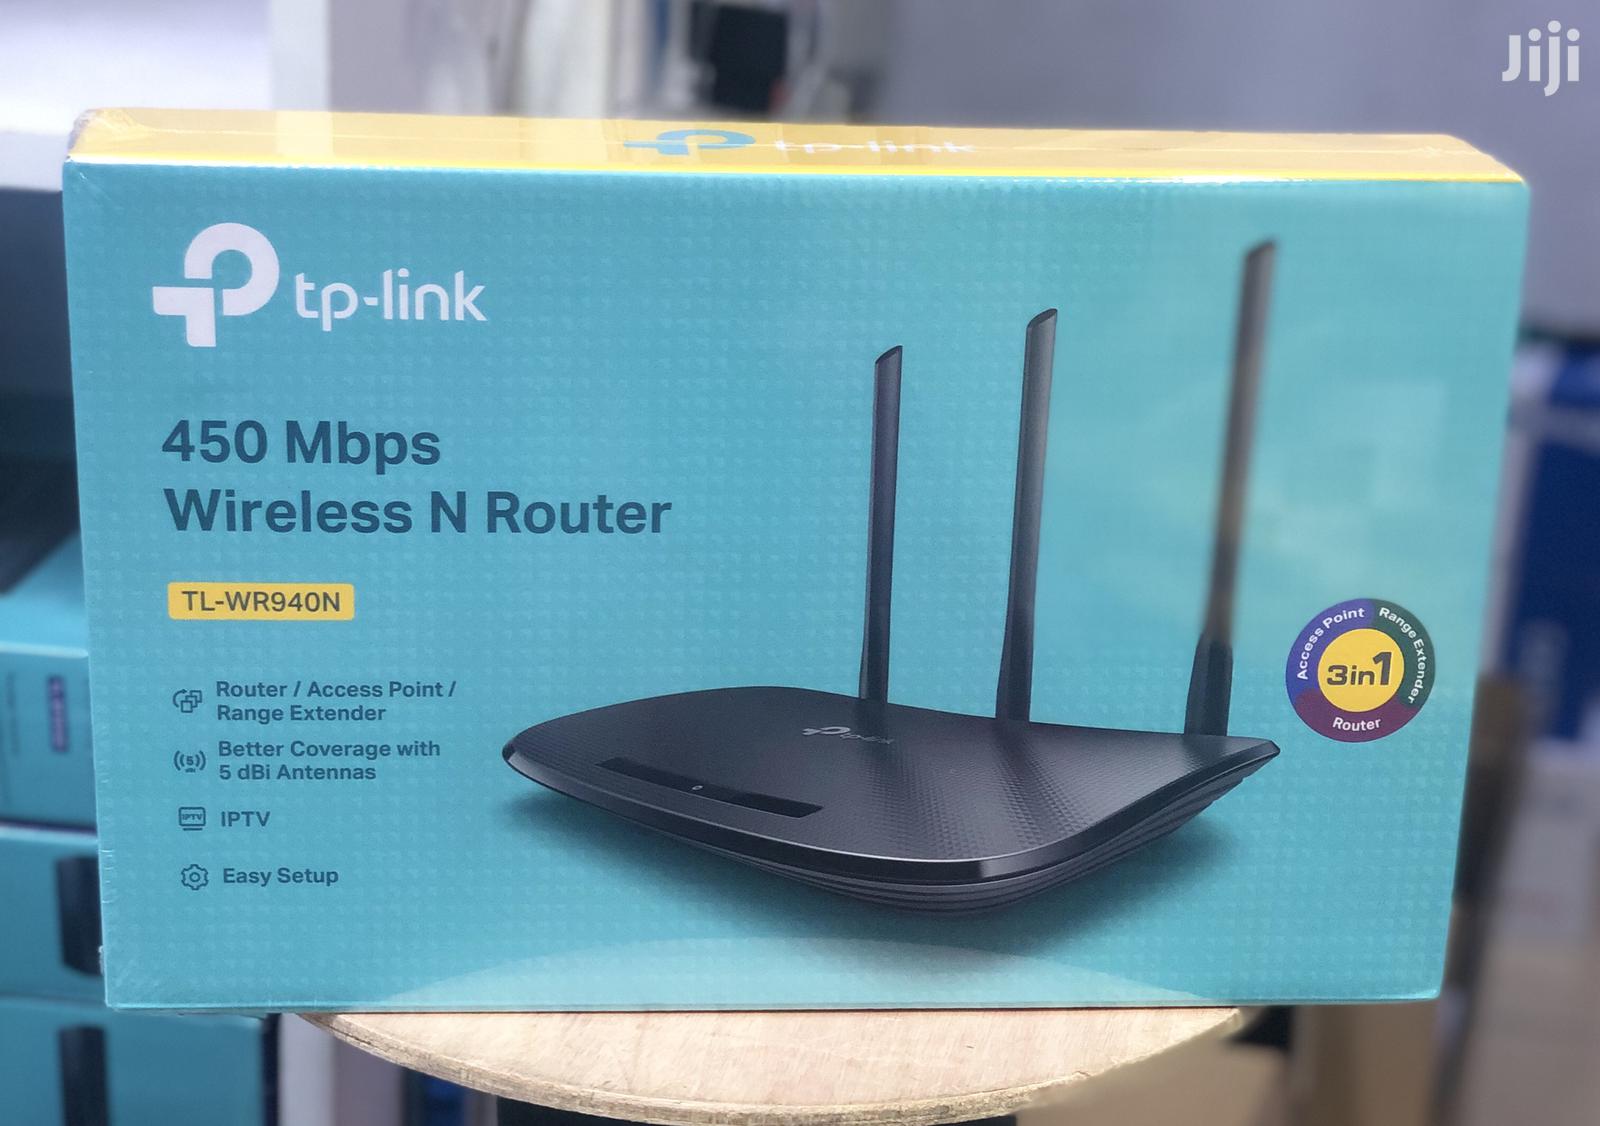 TL-WR940N, 450Mbps Wireless N Router